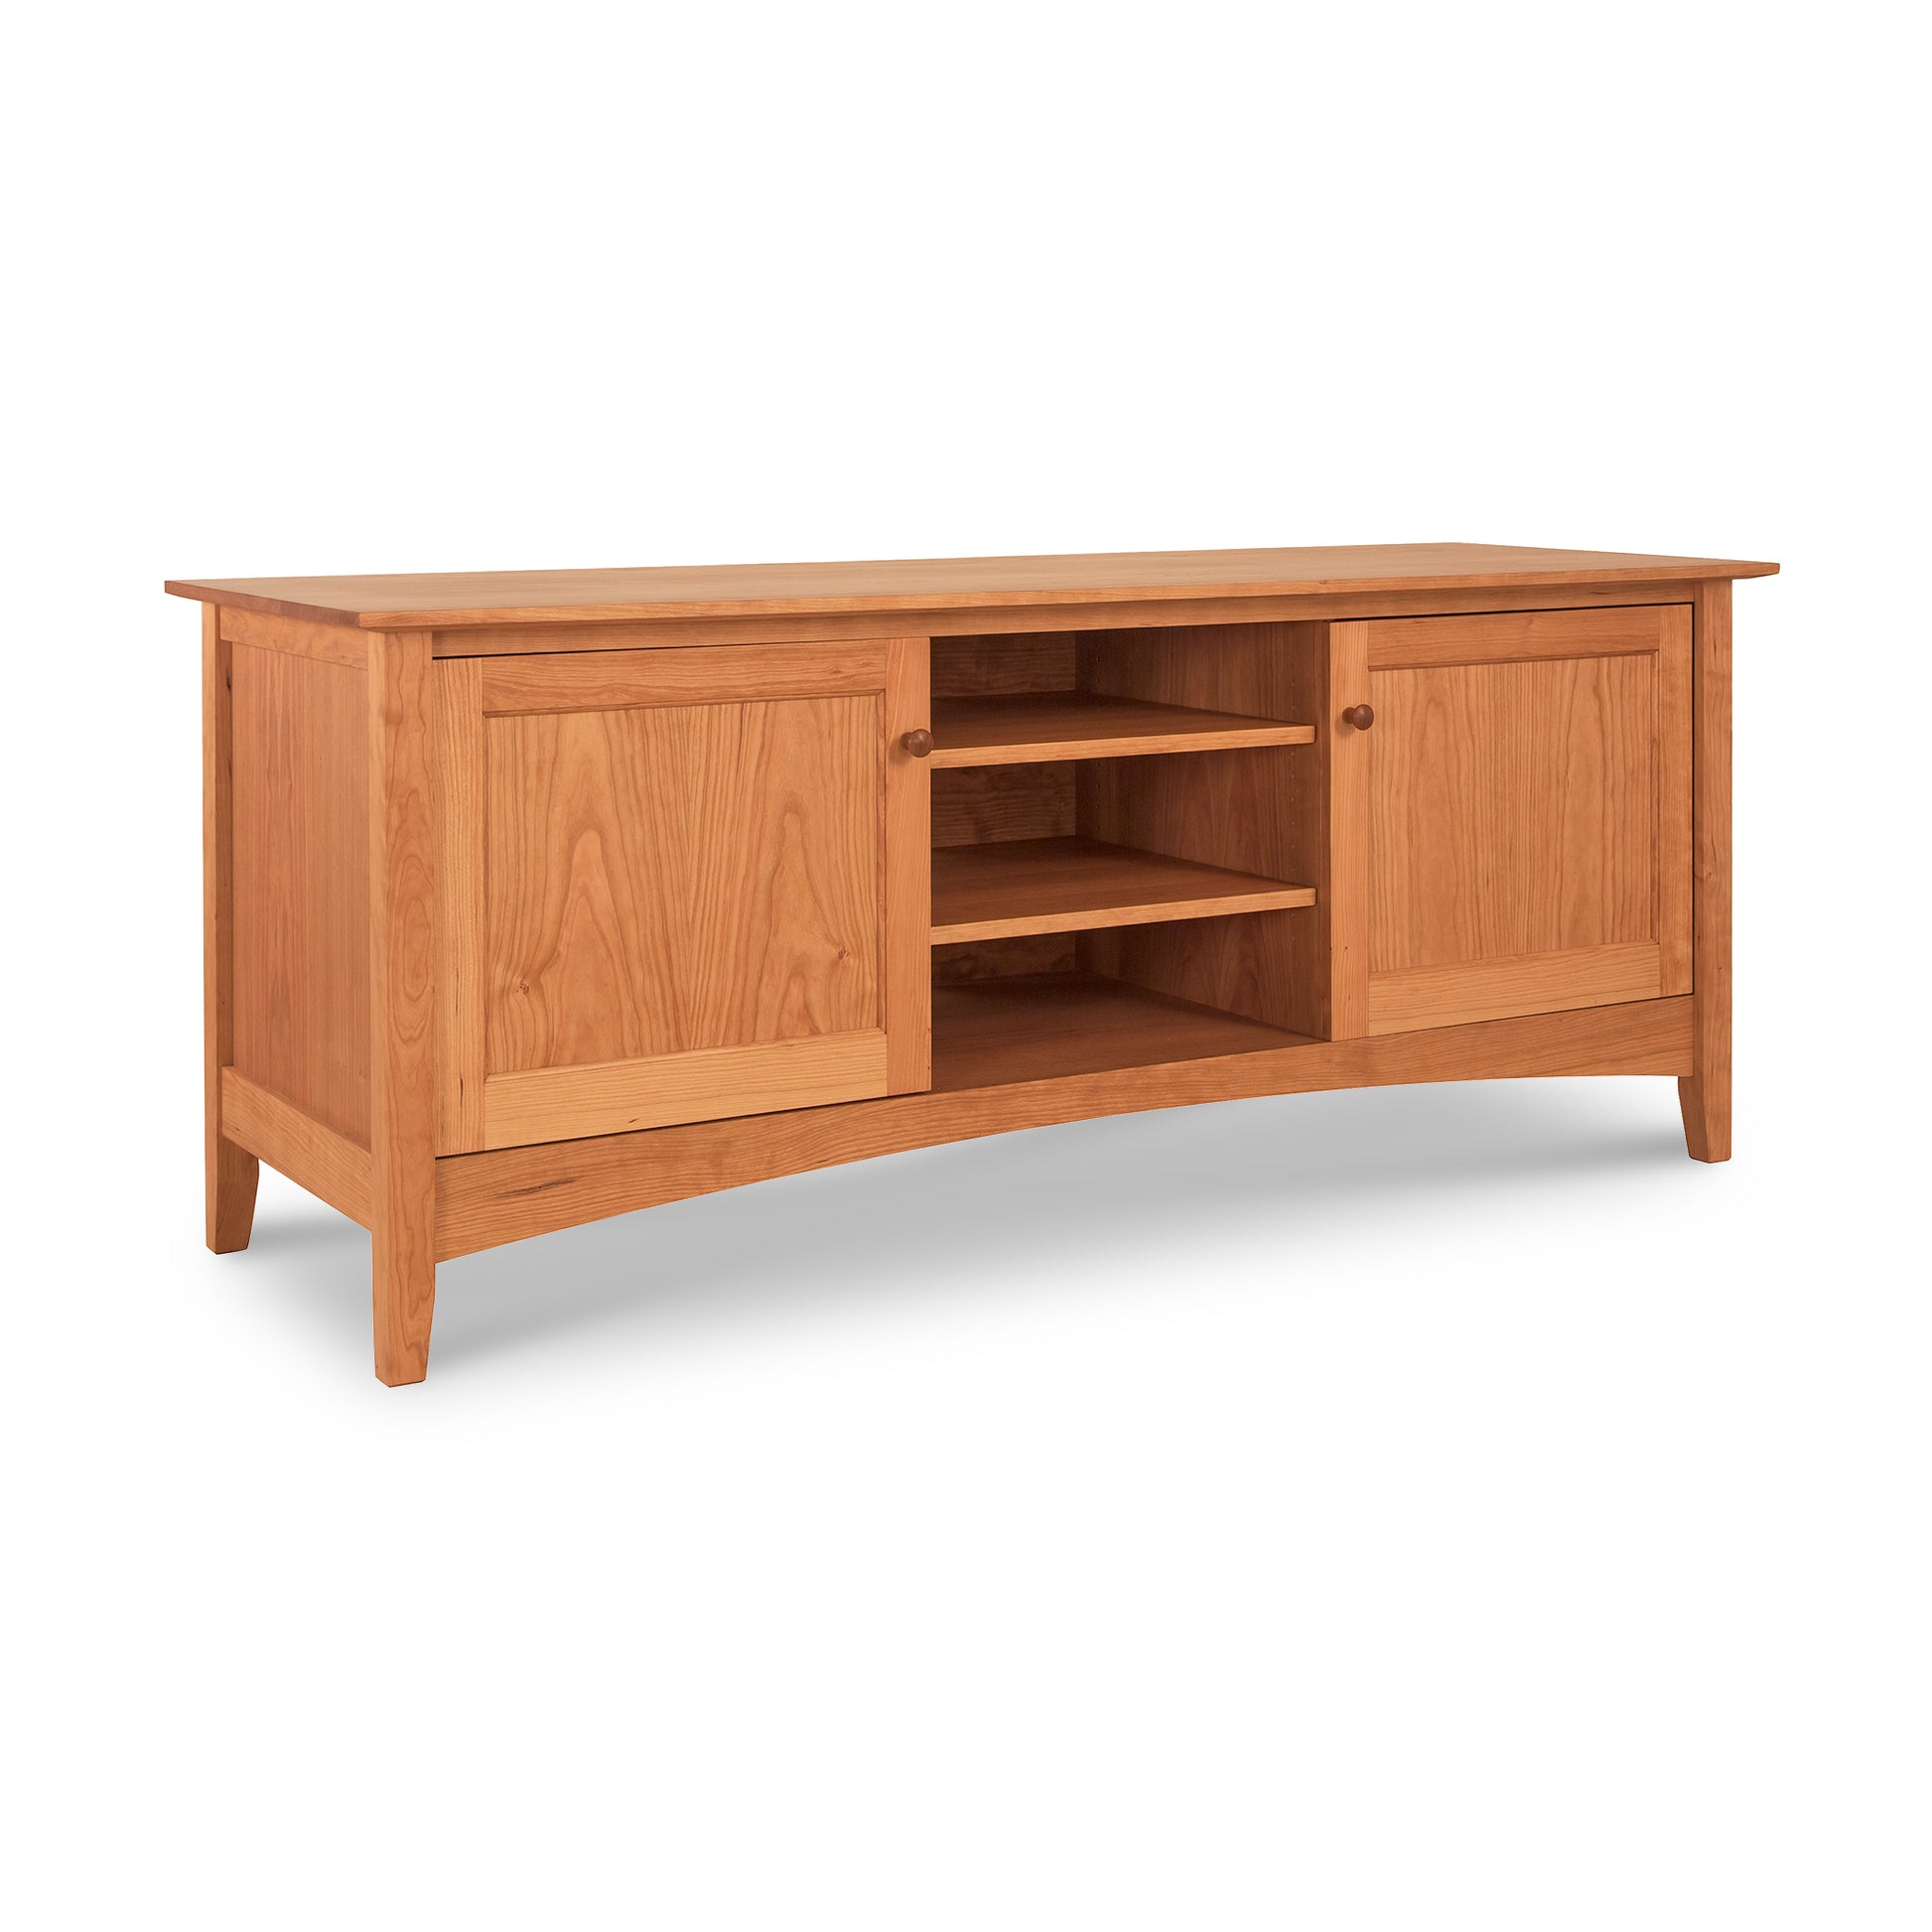 Solid hardwood Maple Corner Woodworks American Shaker 67" TV stand with cabinets and shelves, isolated on a white background.